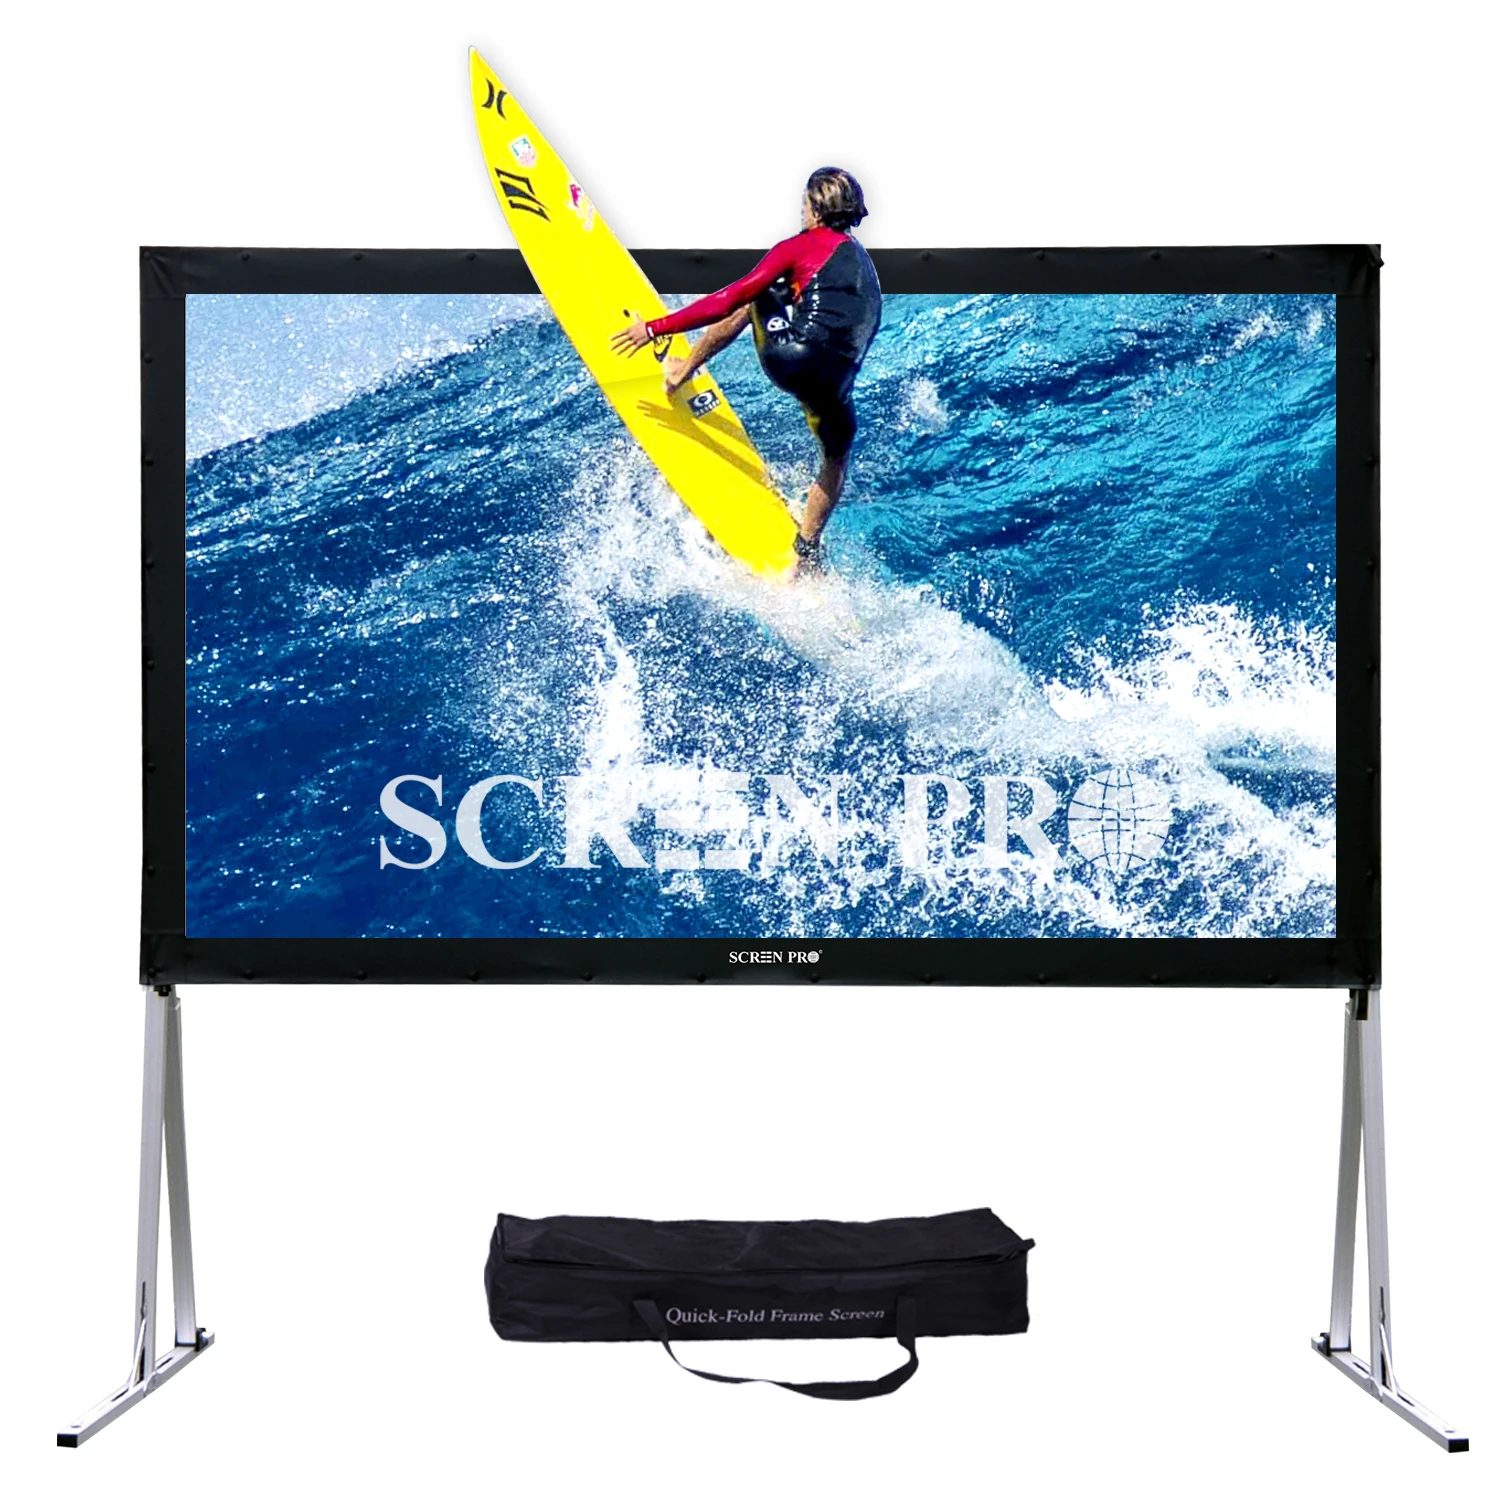 

Screenpro 100inch rear Portable Indoor/Outdoor Movie Theater Projector Screen with Stand Legs and Carry Bag, Aluminum frame